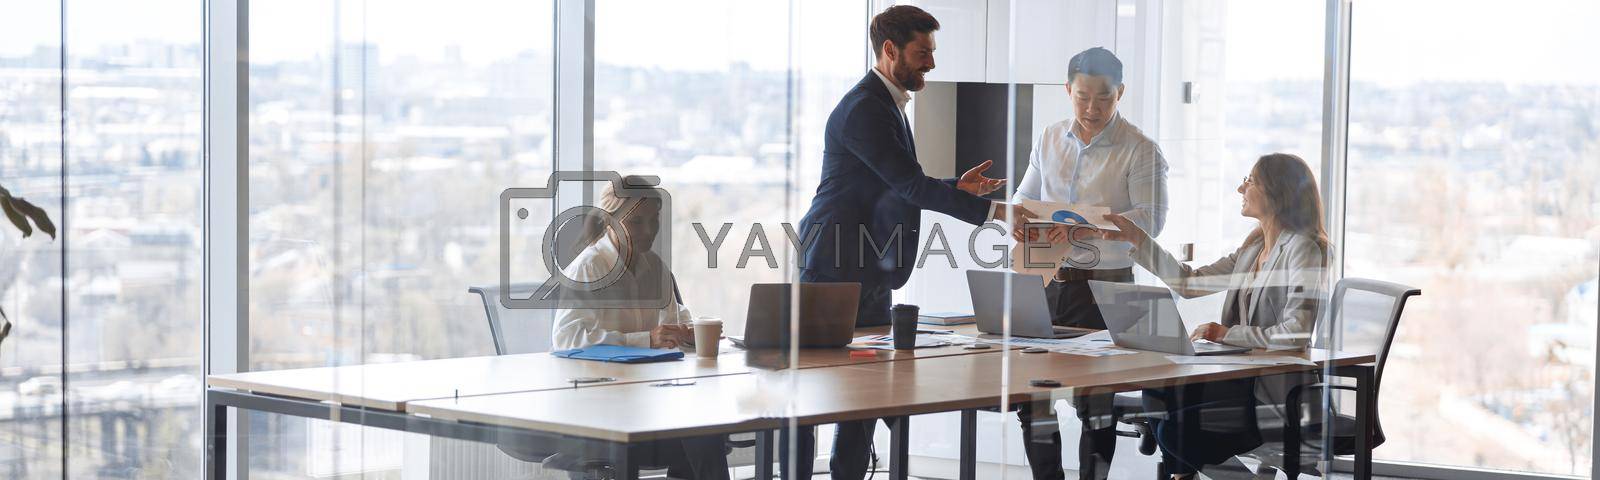 Royalty free image of People standing near table, team of young businessmen working and communicating together in office by Yaroslav_astakhov